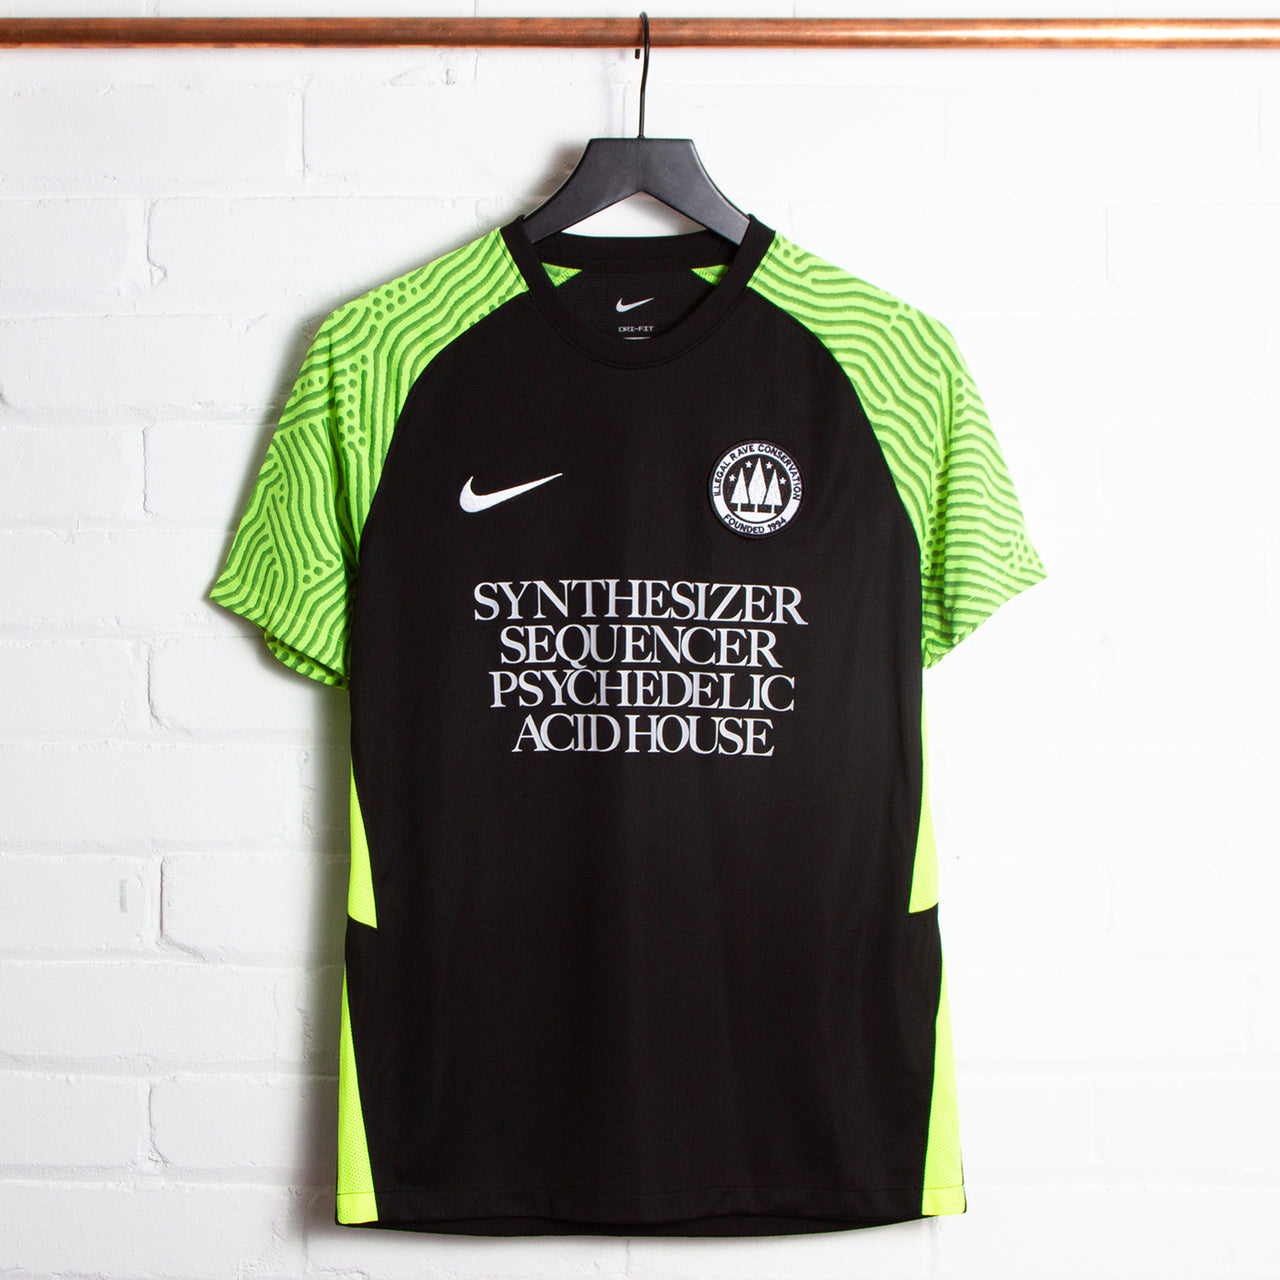 Wasted Heroes FC Strike Green Sleeve 010 - Football Jersey - Black Rave